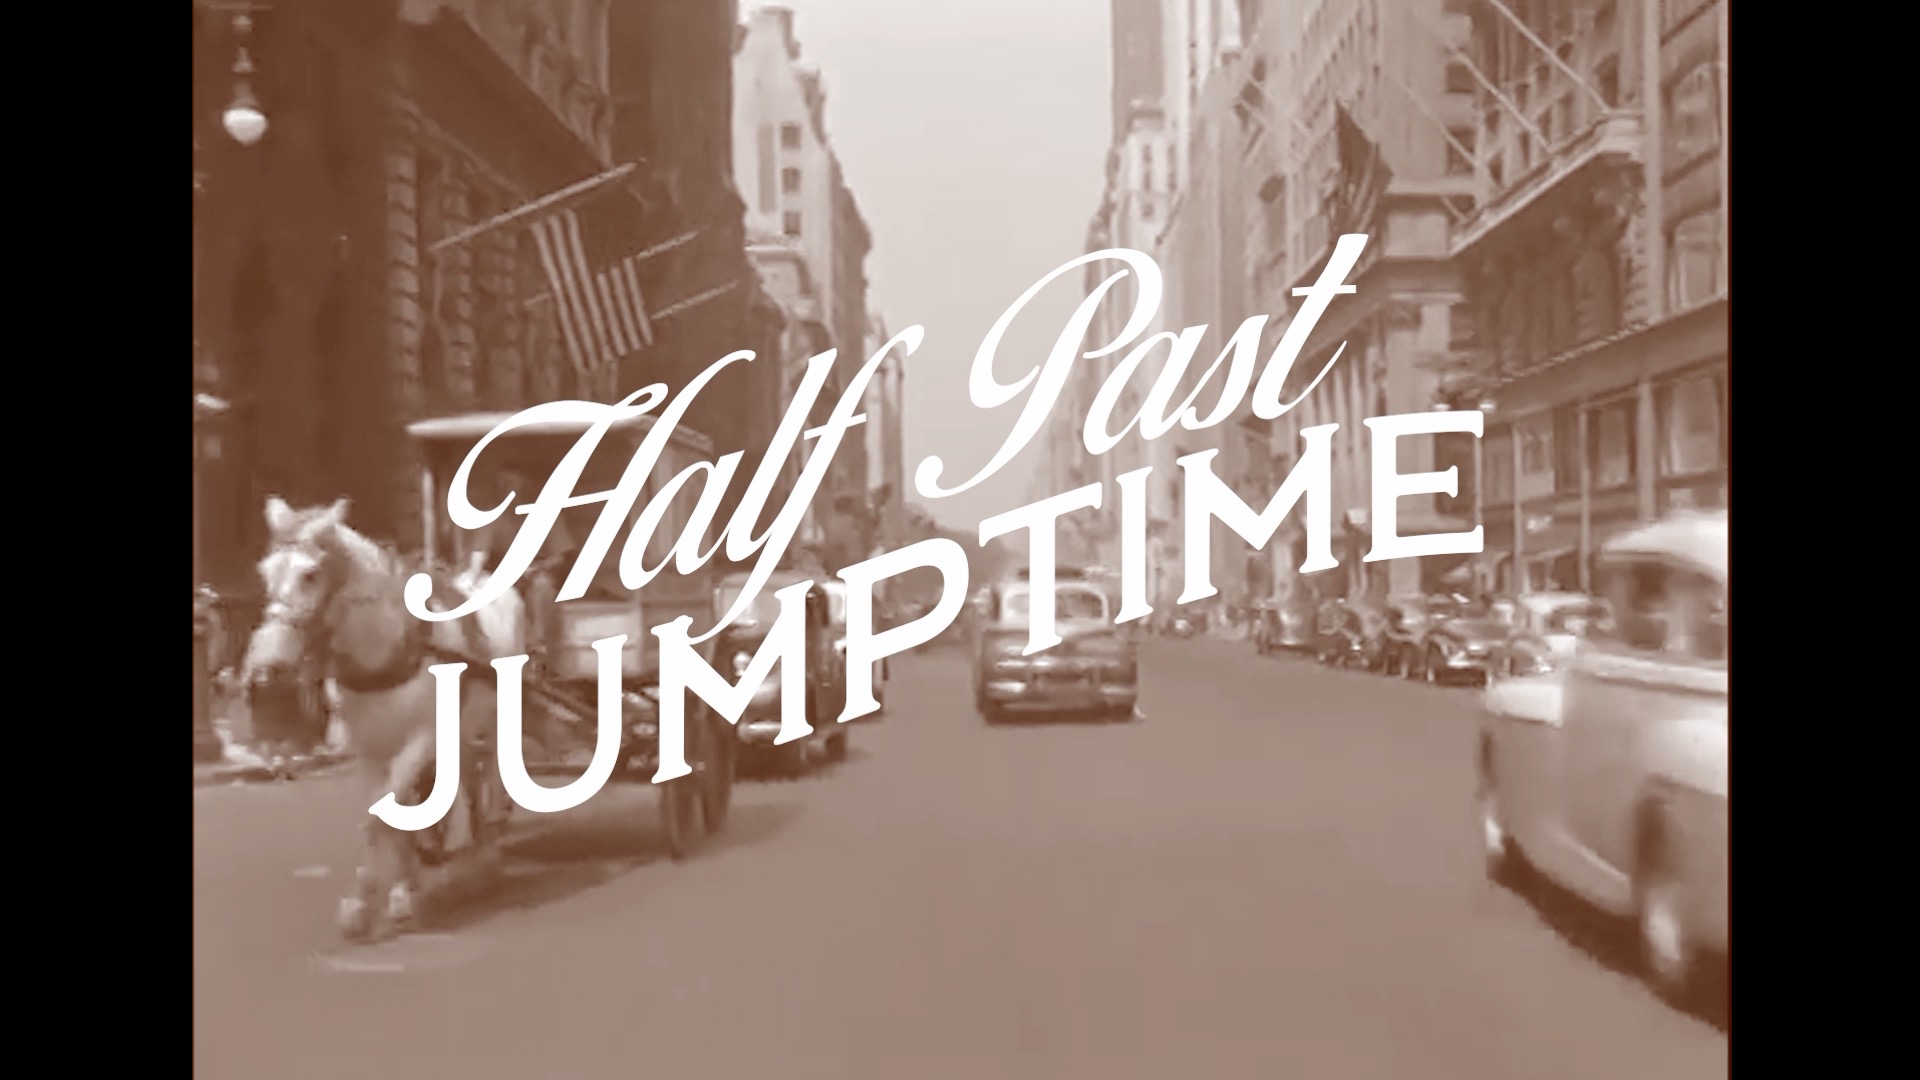 Still from Title page of Half Past Jump Time